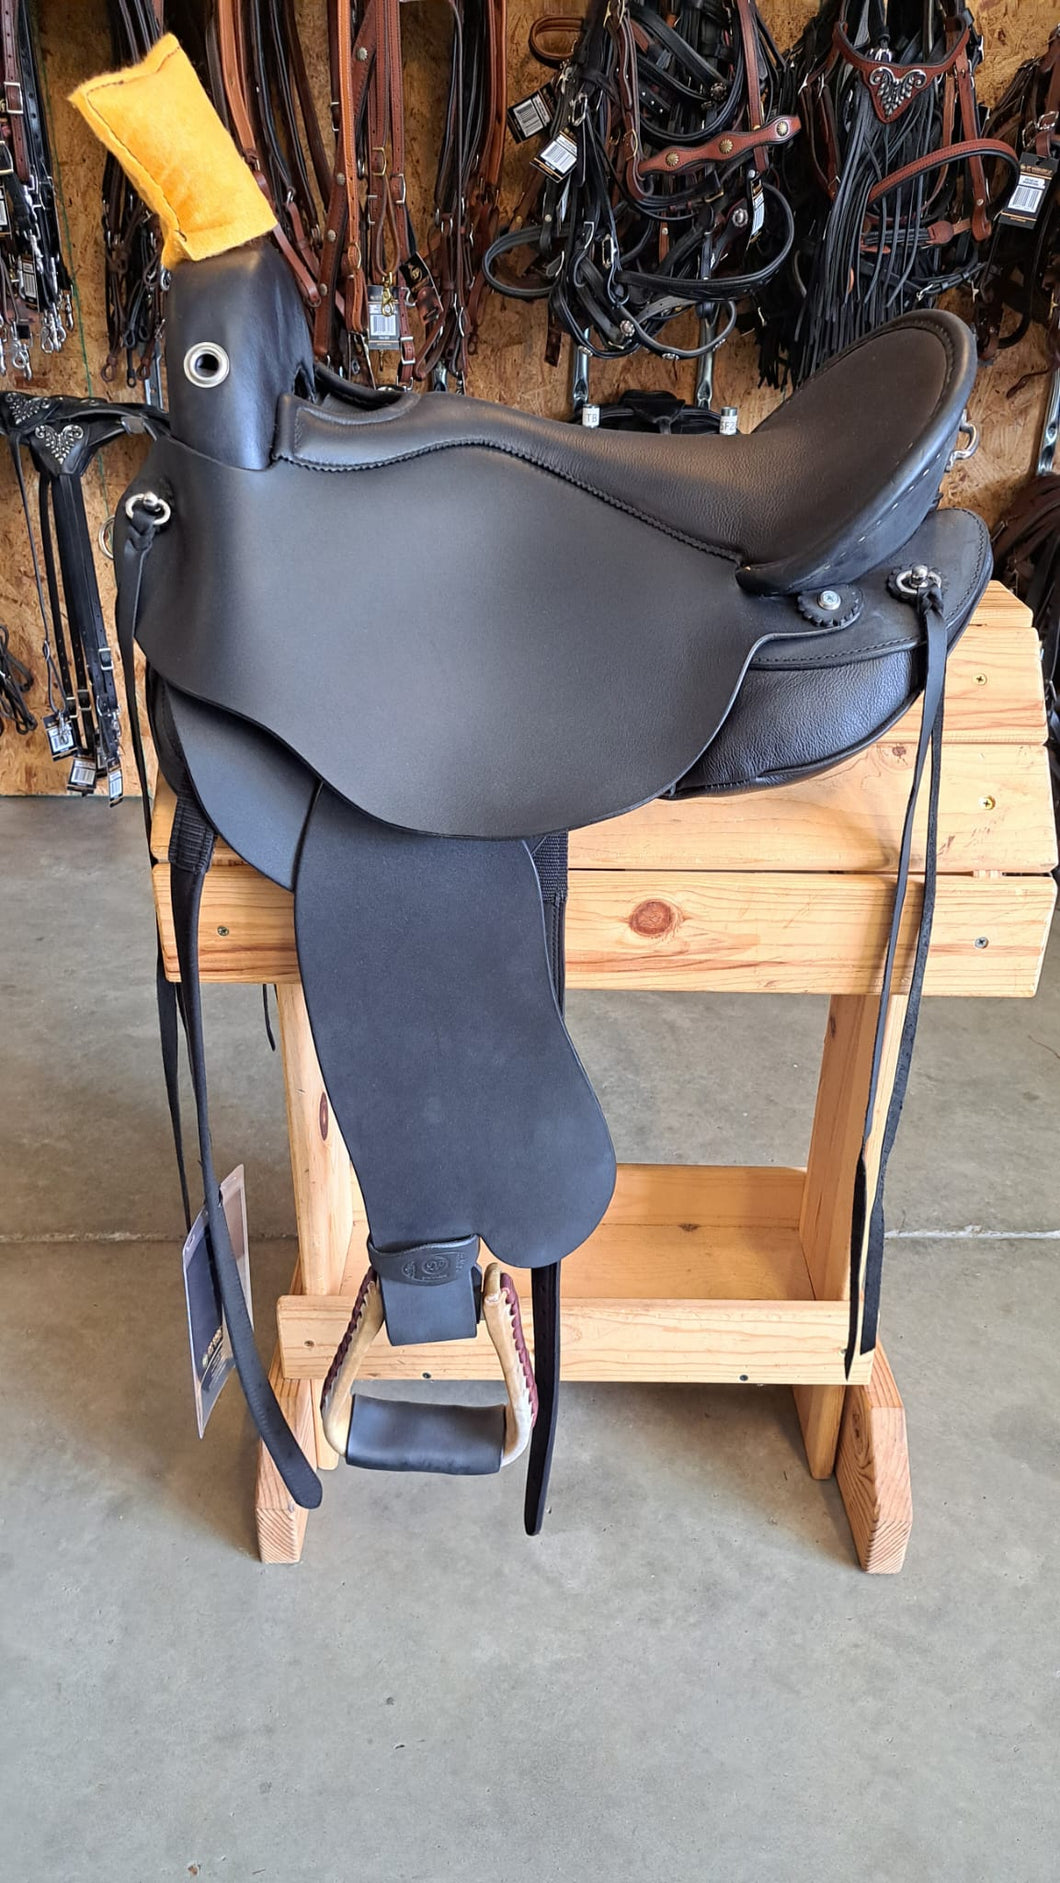 DP Saddlery Quantum Short & Light Western with Western Dressage Seat 6222-S3 WD